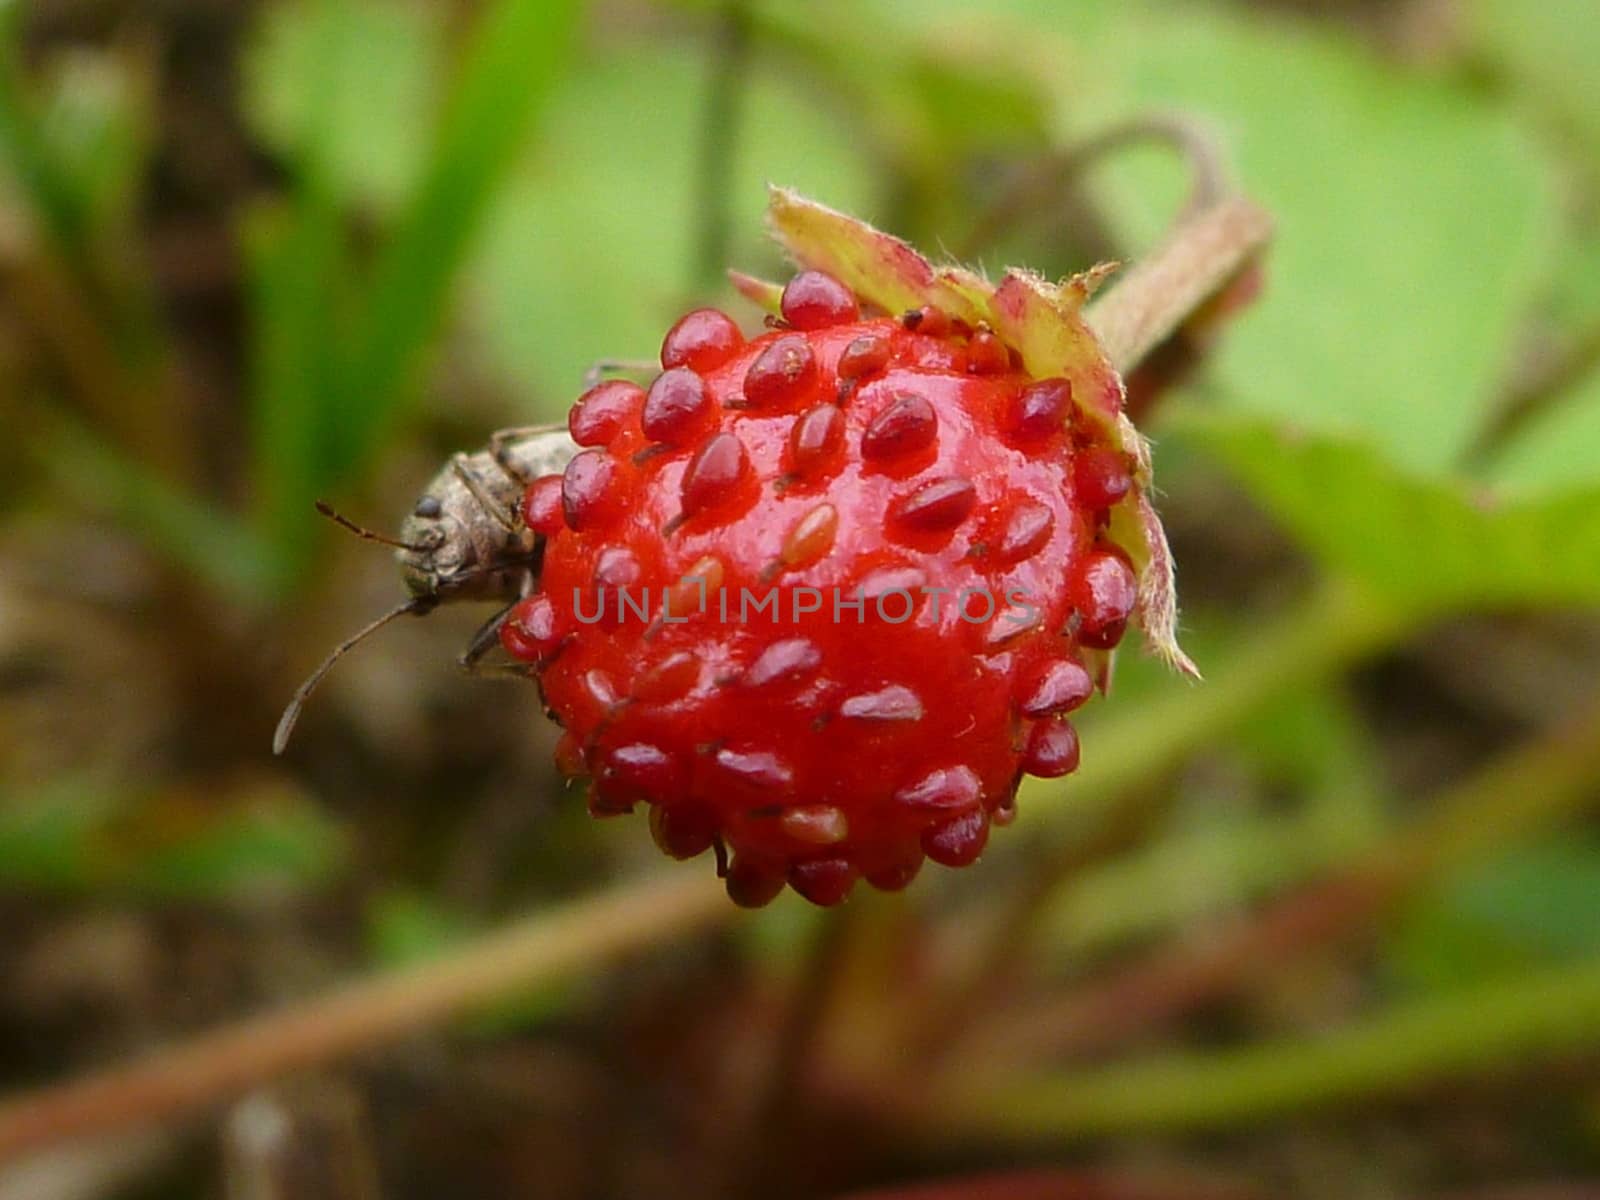 Beetle resting on wild strawberry.